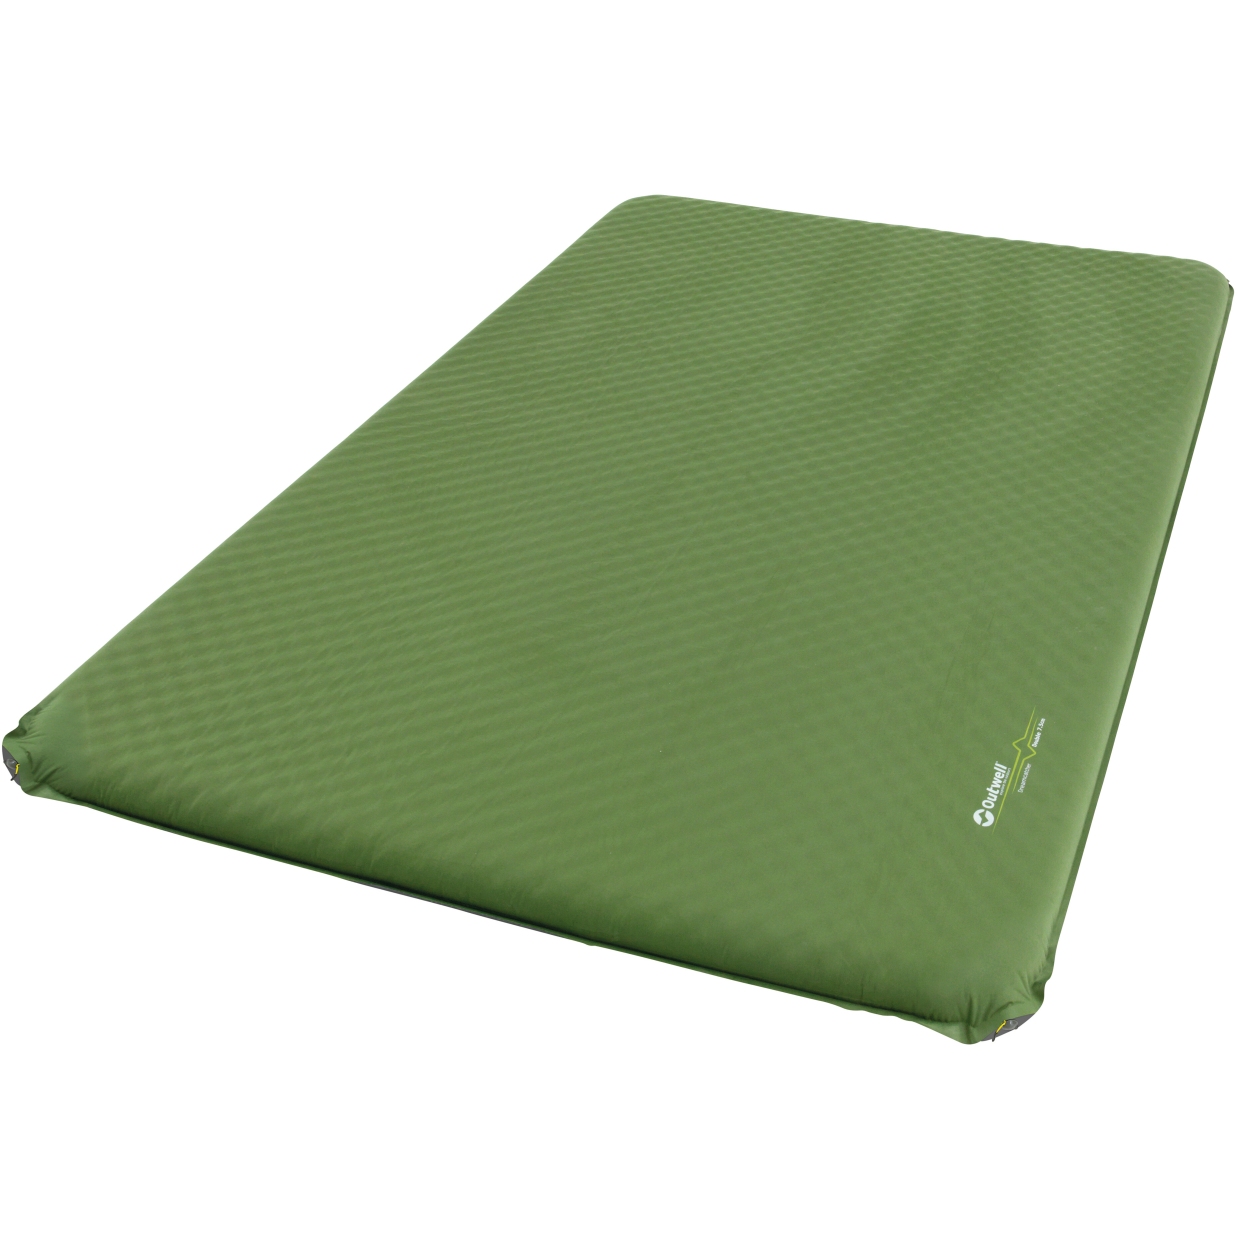 Picture of Outwell Dreamcatcher Double Sleeping Pad - 7.5 cm - Green